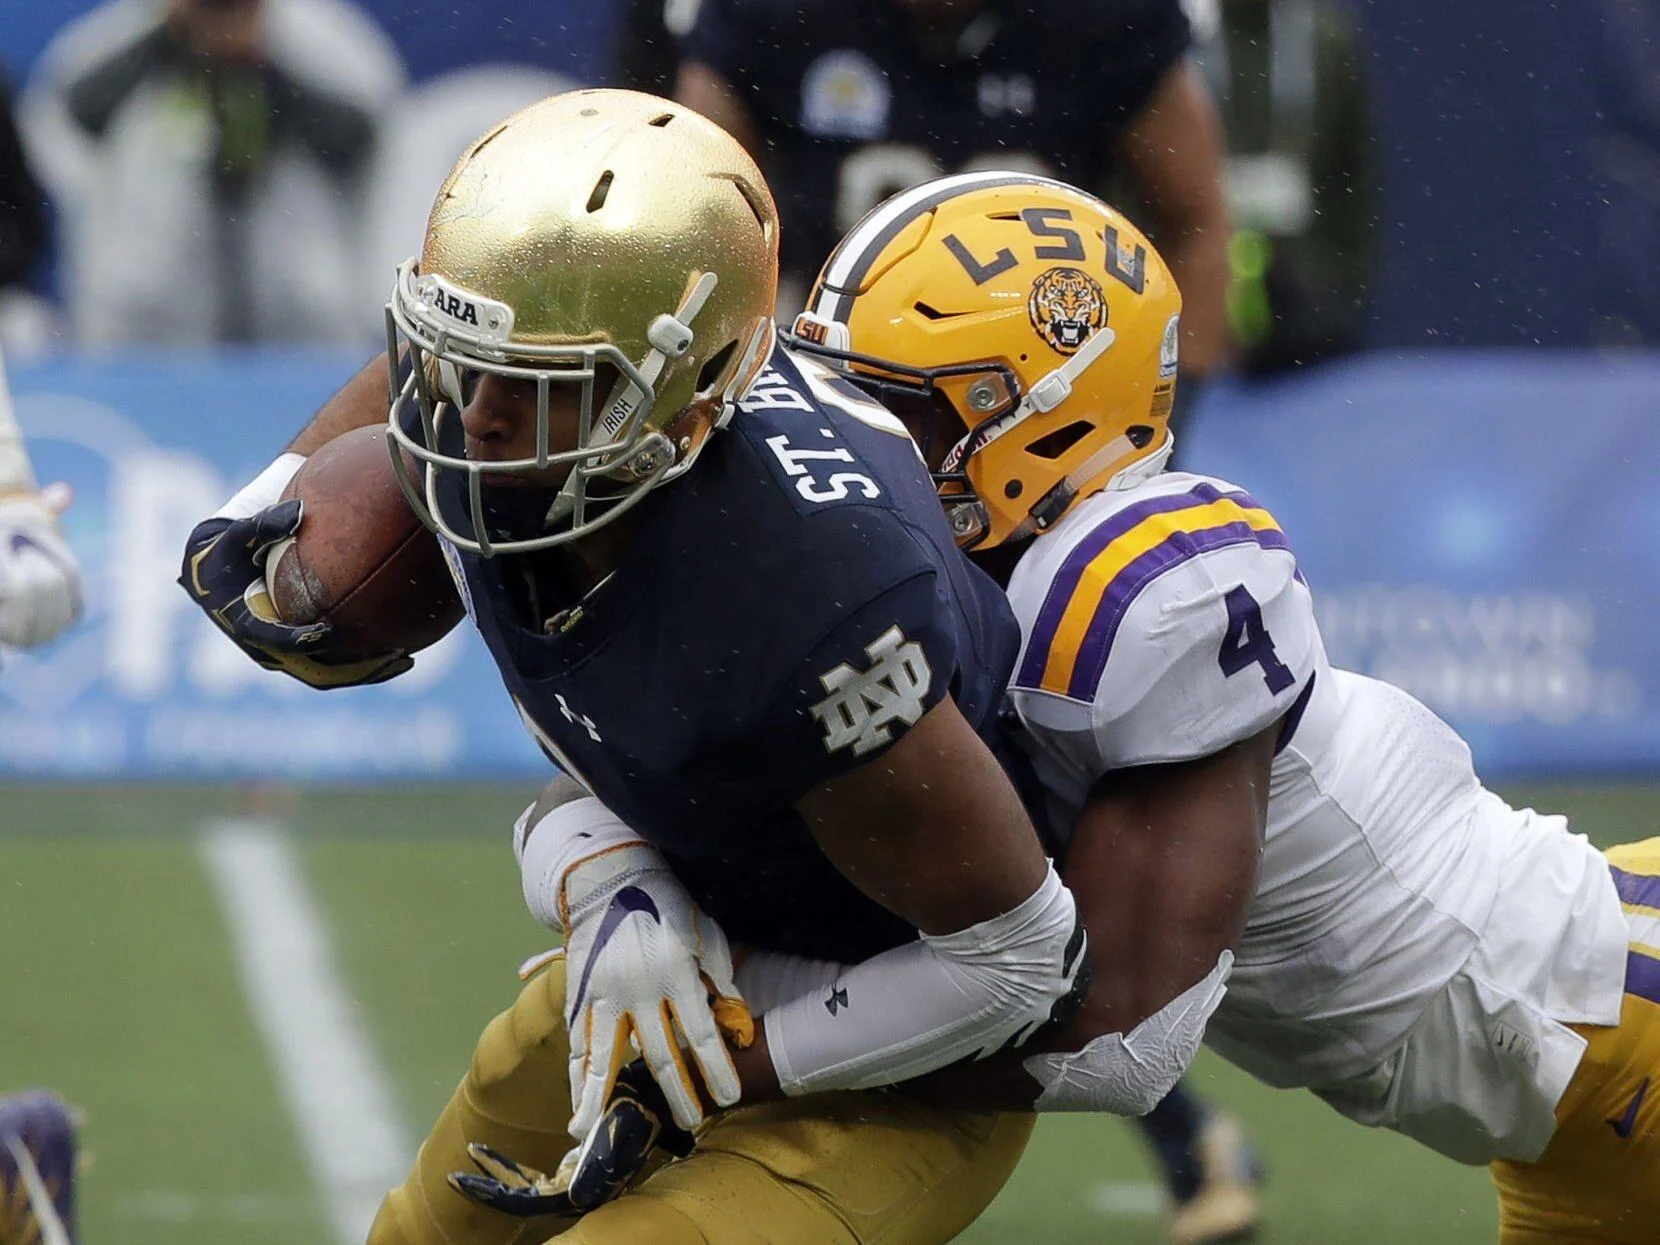 NFL News: New Orleans Saints Add Promising Receiver Equanimeous St. Brown to Boost Passing Attack